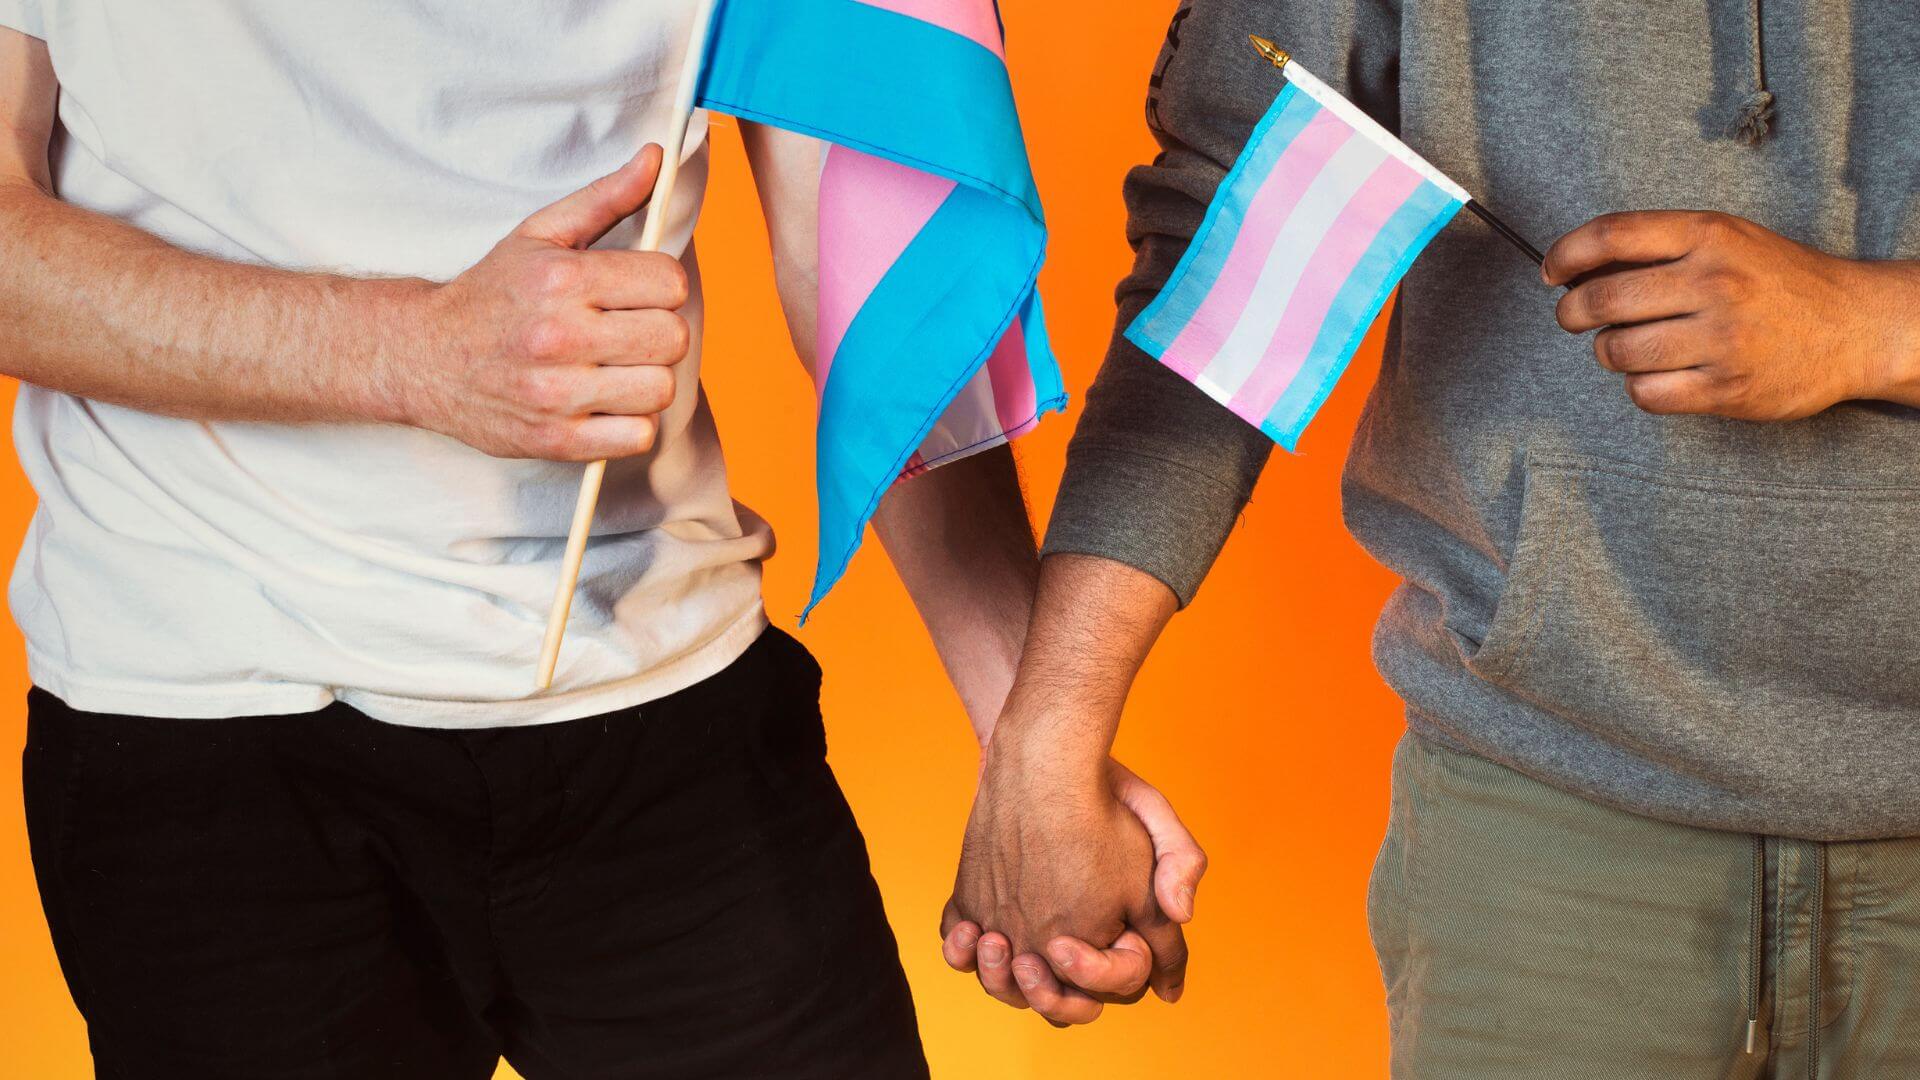 Two Men Holding hands and holding trans pride flags